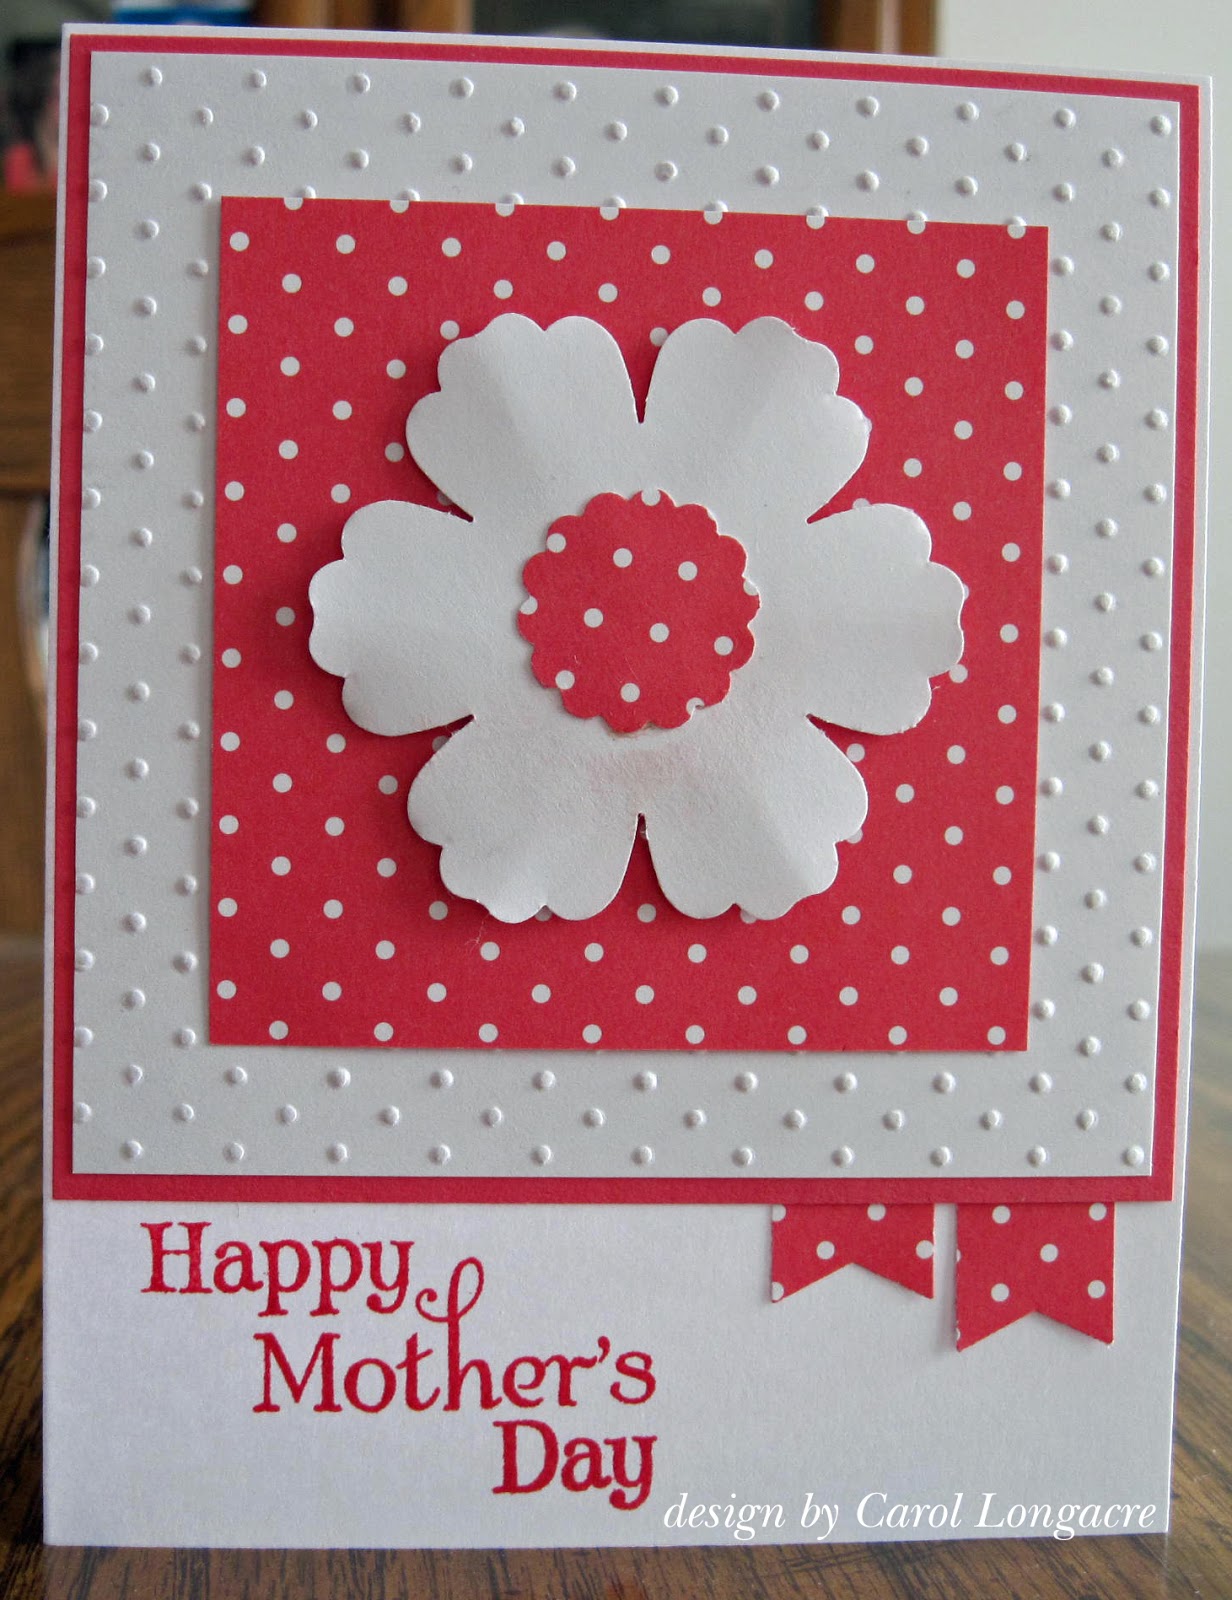 Our Little Inspirations: Mother's Day Cards